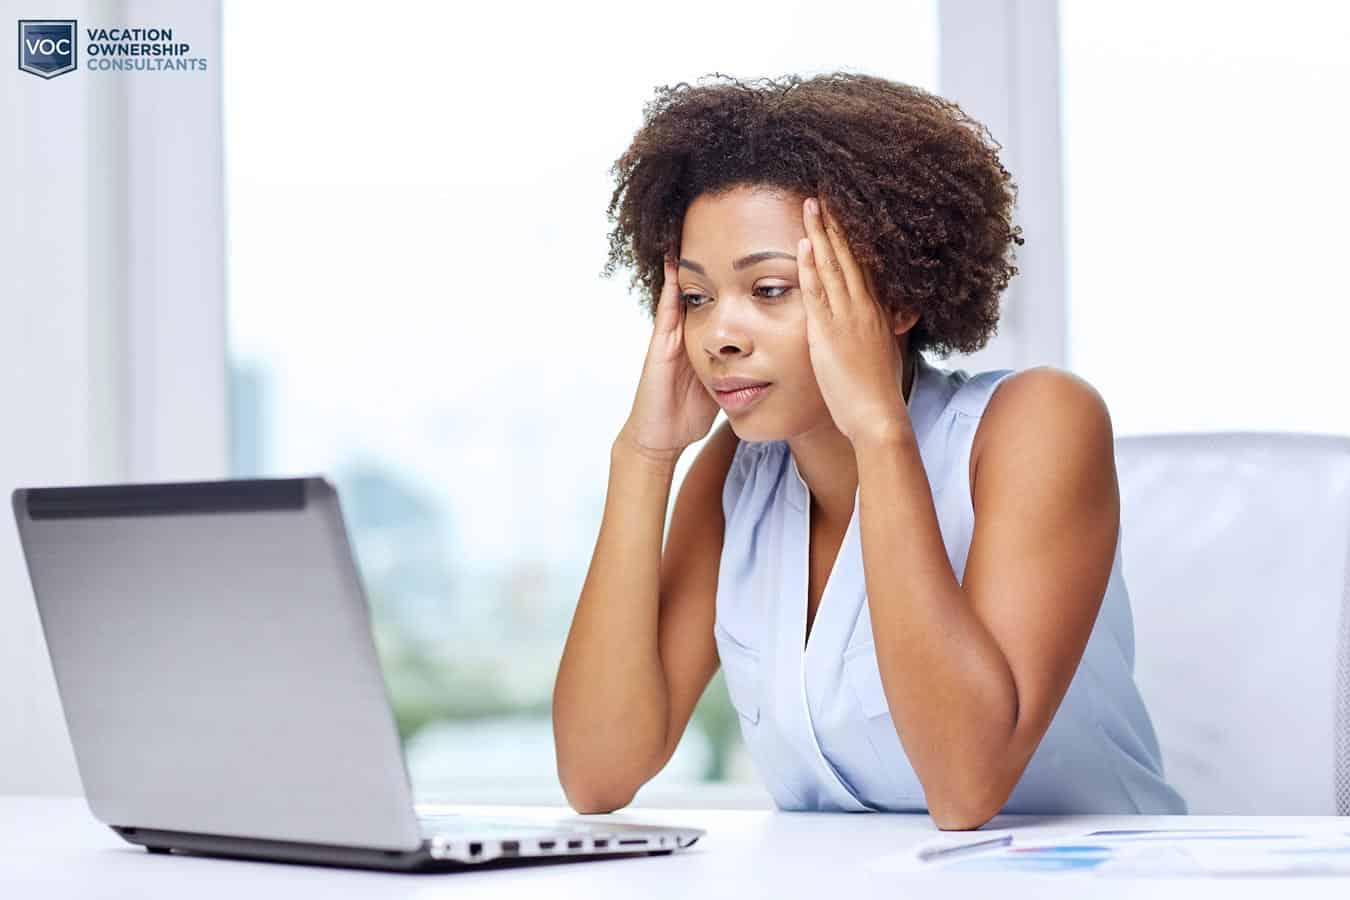 woman-looking-depressed-at-computer-wondering-what-to-do-with-her-timeshare-purhases-and-how-to-get-rid-of-them